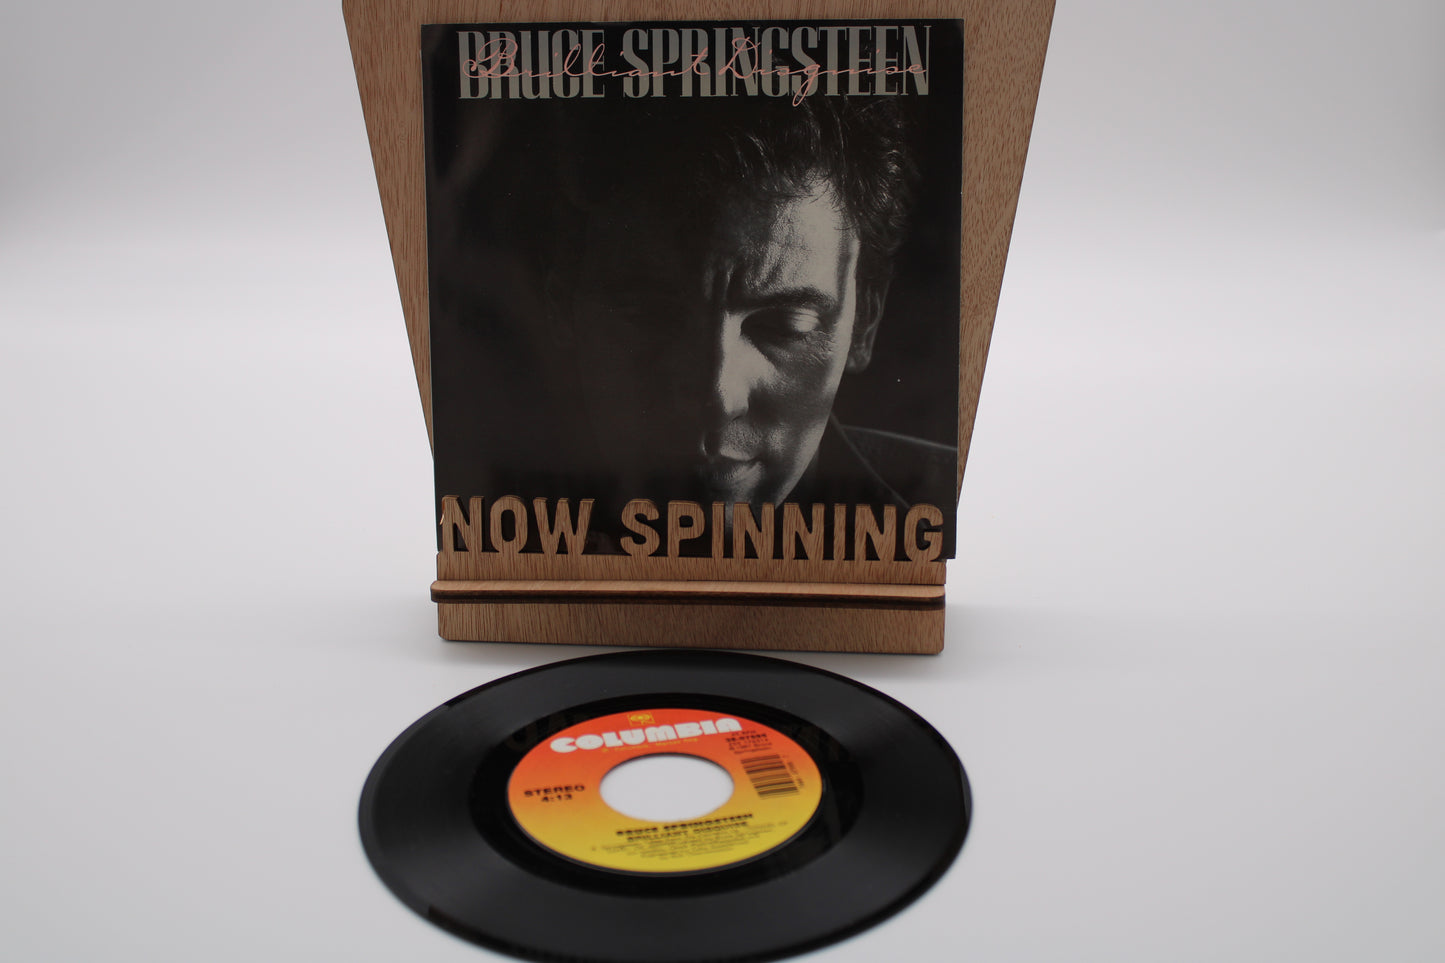 Bruce Springsteen - 45 Record - Brilliant Disguise 1987 Vinyl Release + Picture Sleeve